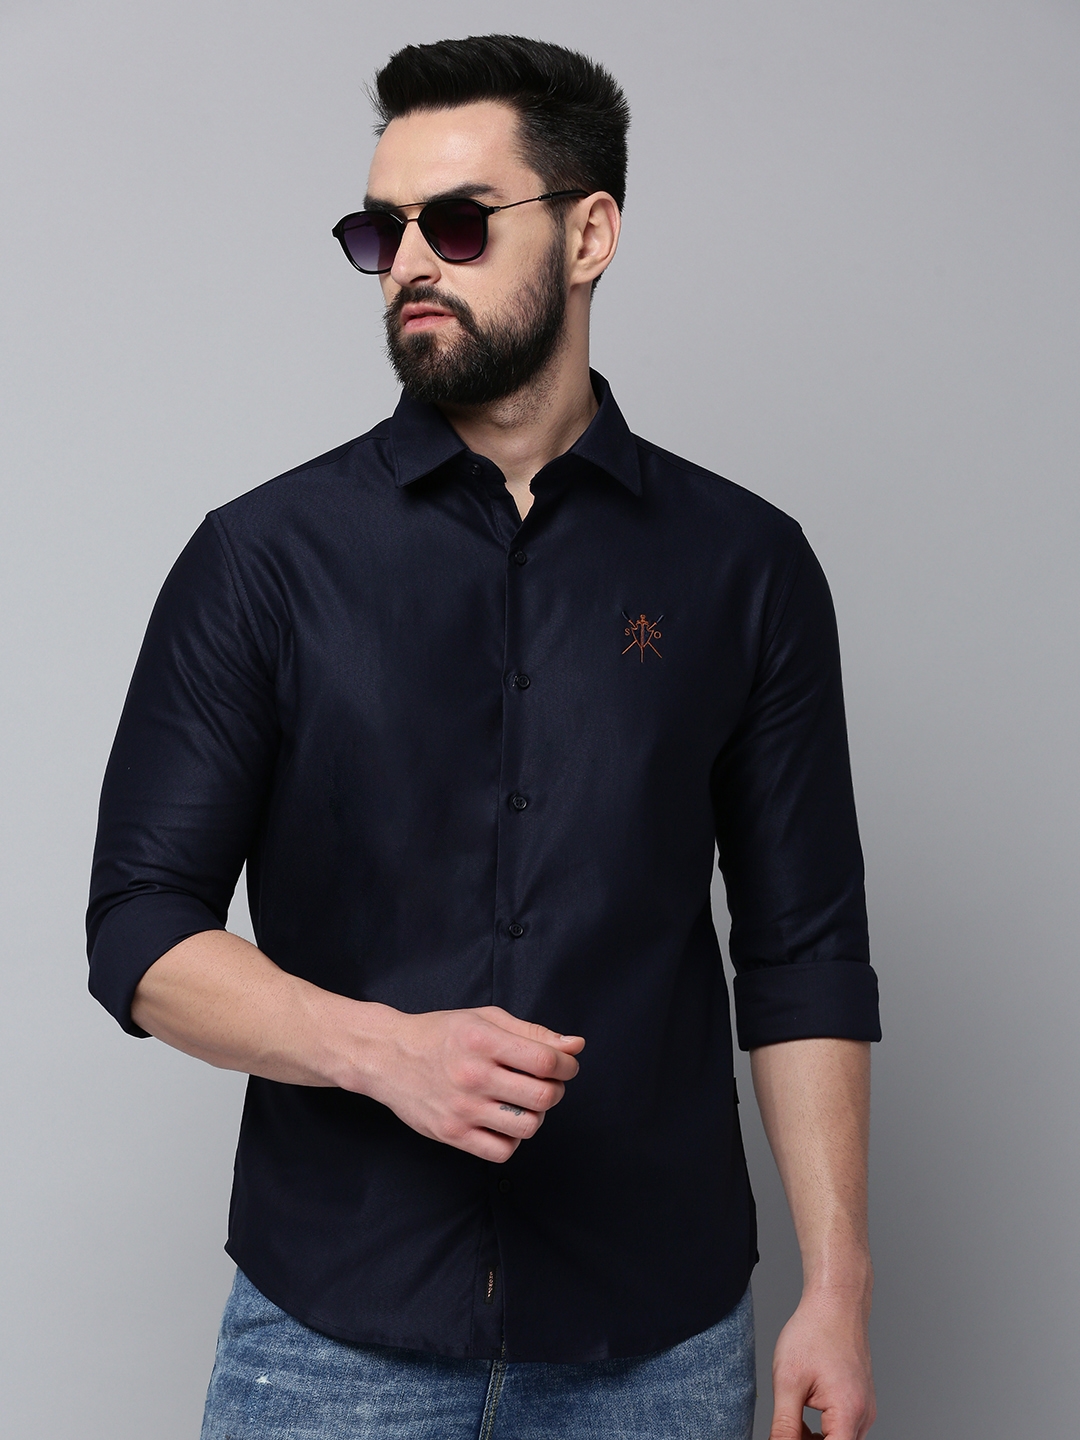 SHOWOFF Men's Spread Collar Long Sleeves Solid Navy Blue Shirt